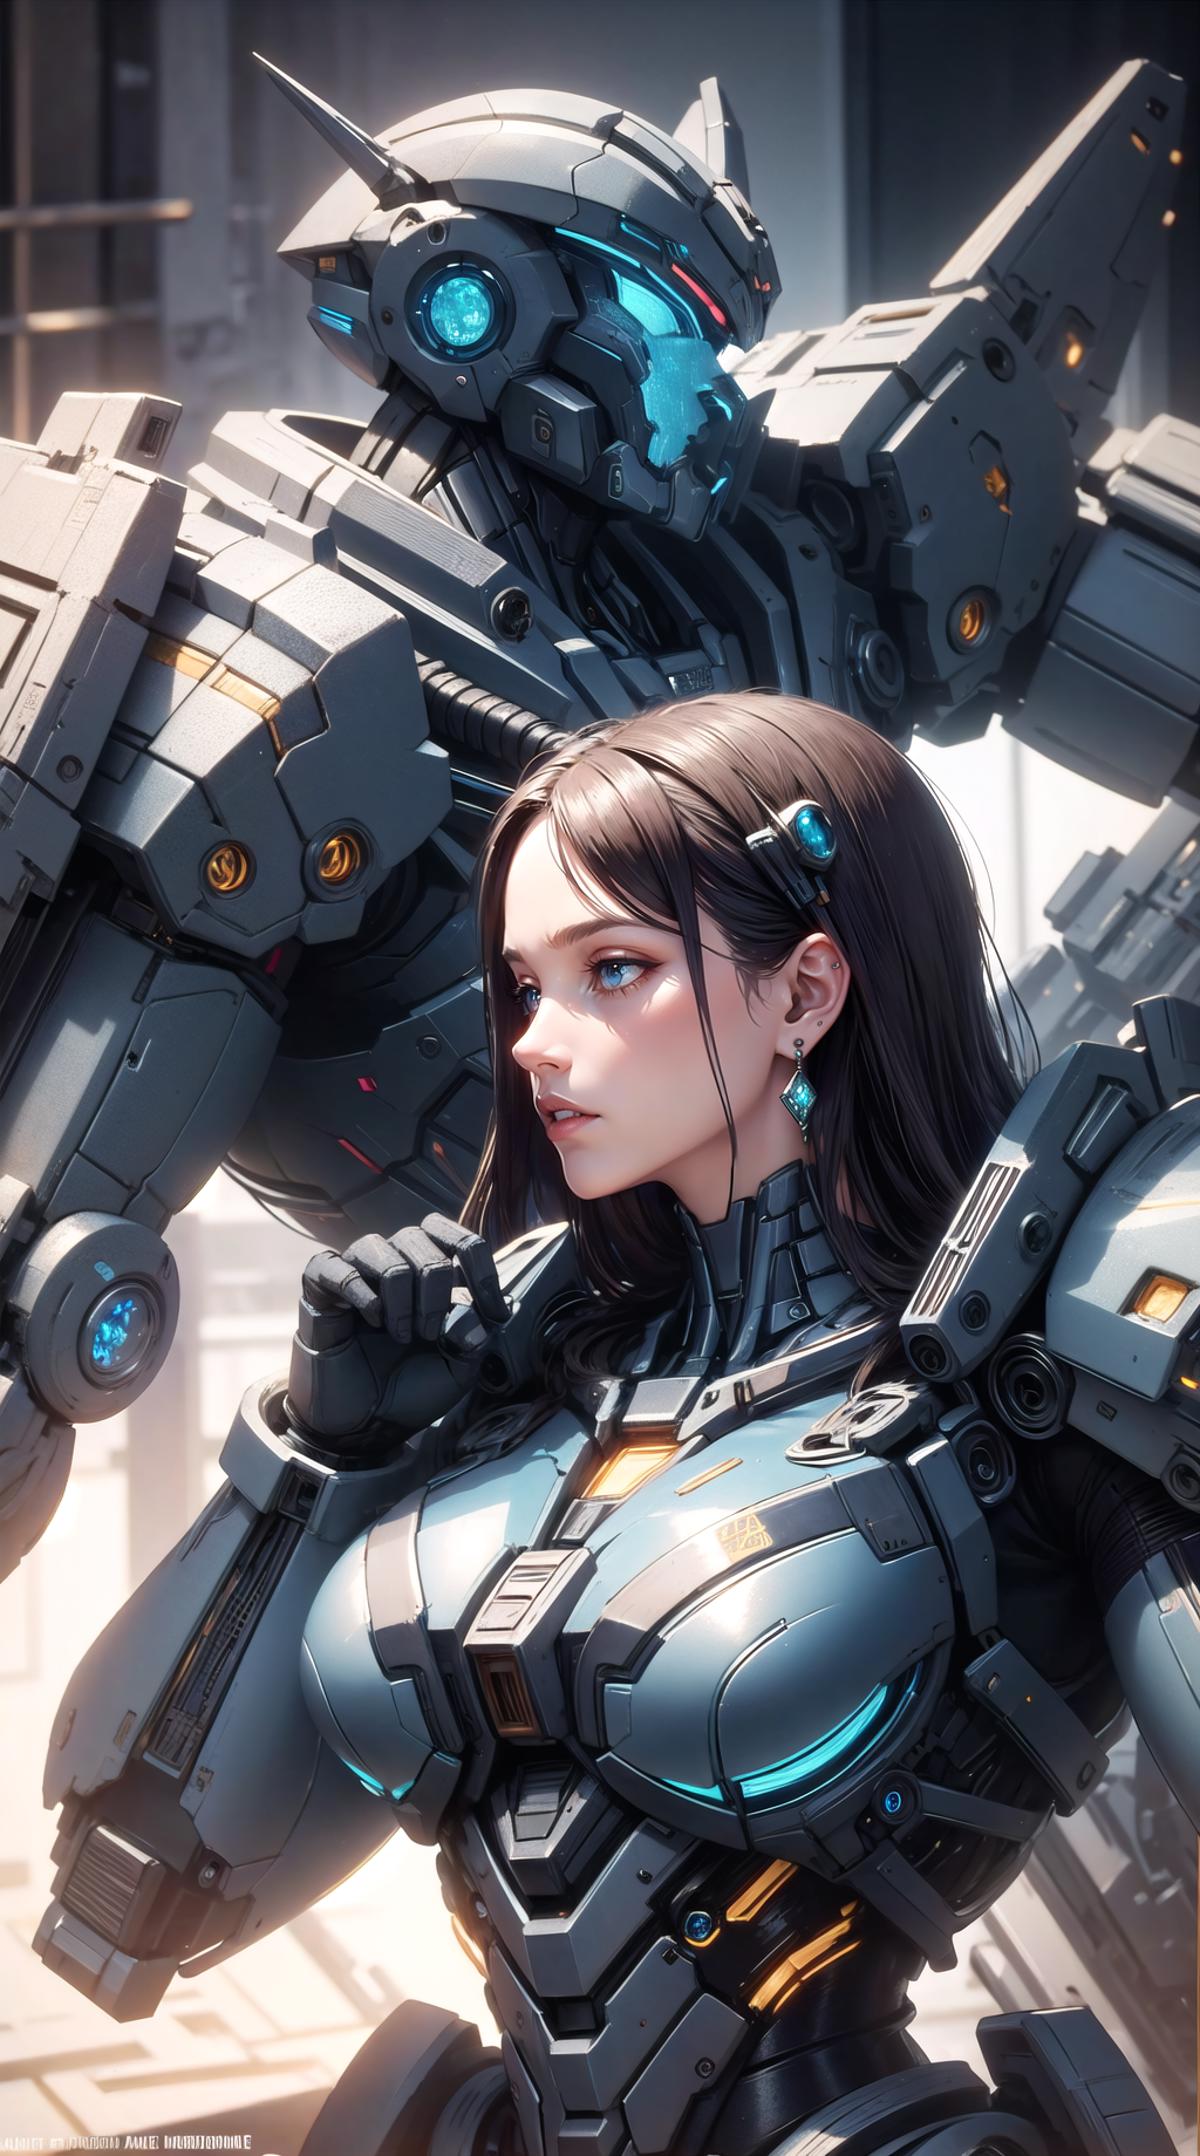 Giant Robowaifu Suit - by EDG image by wrench1815